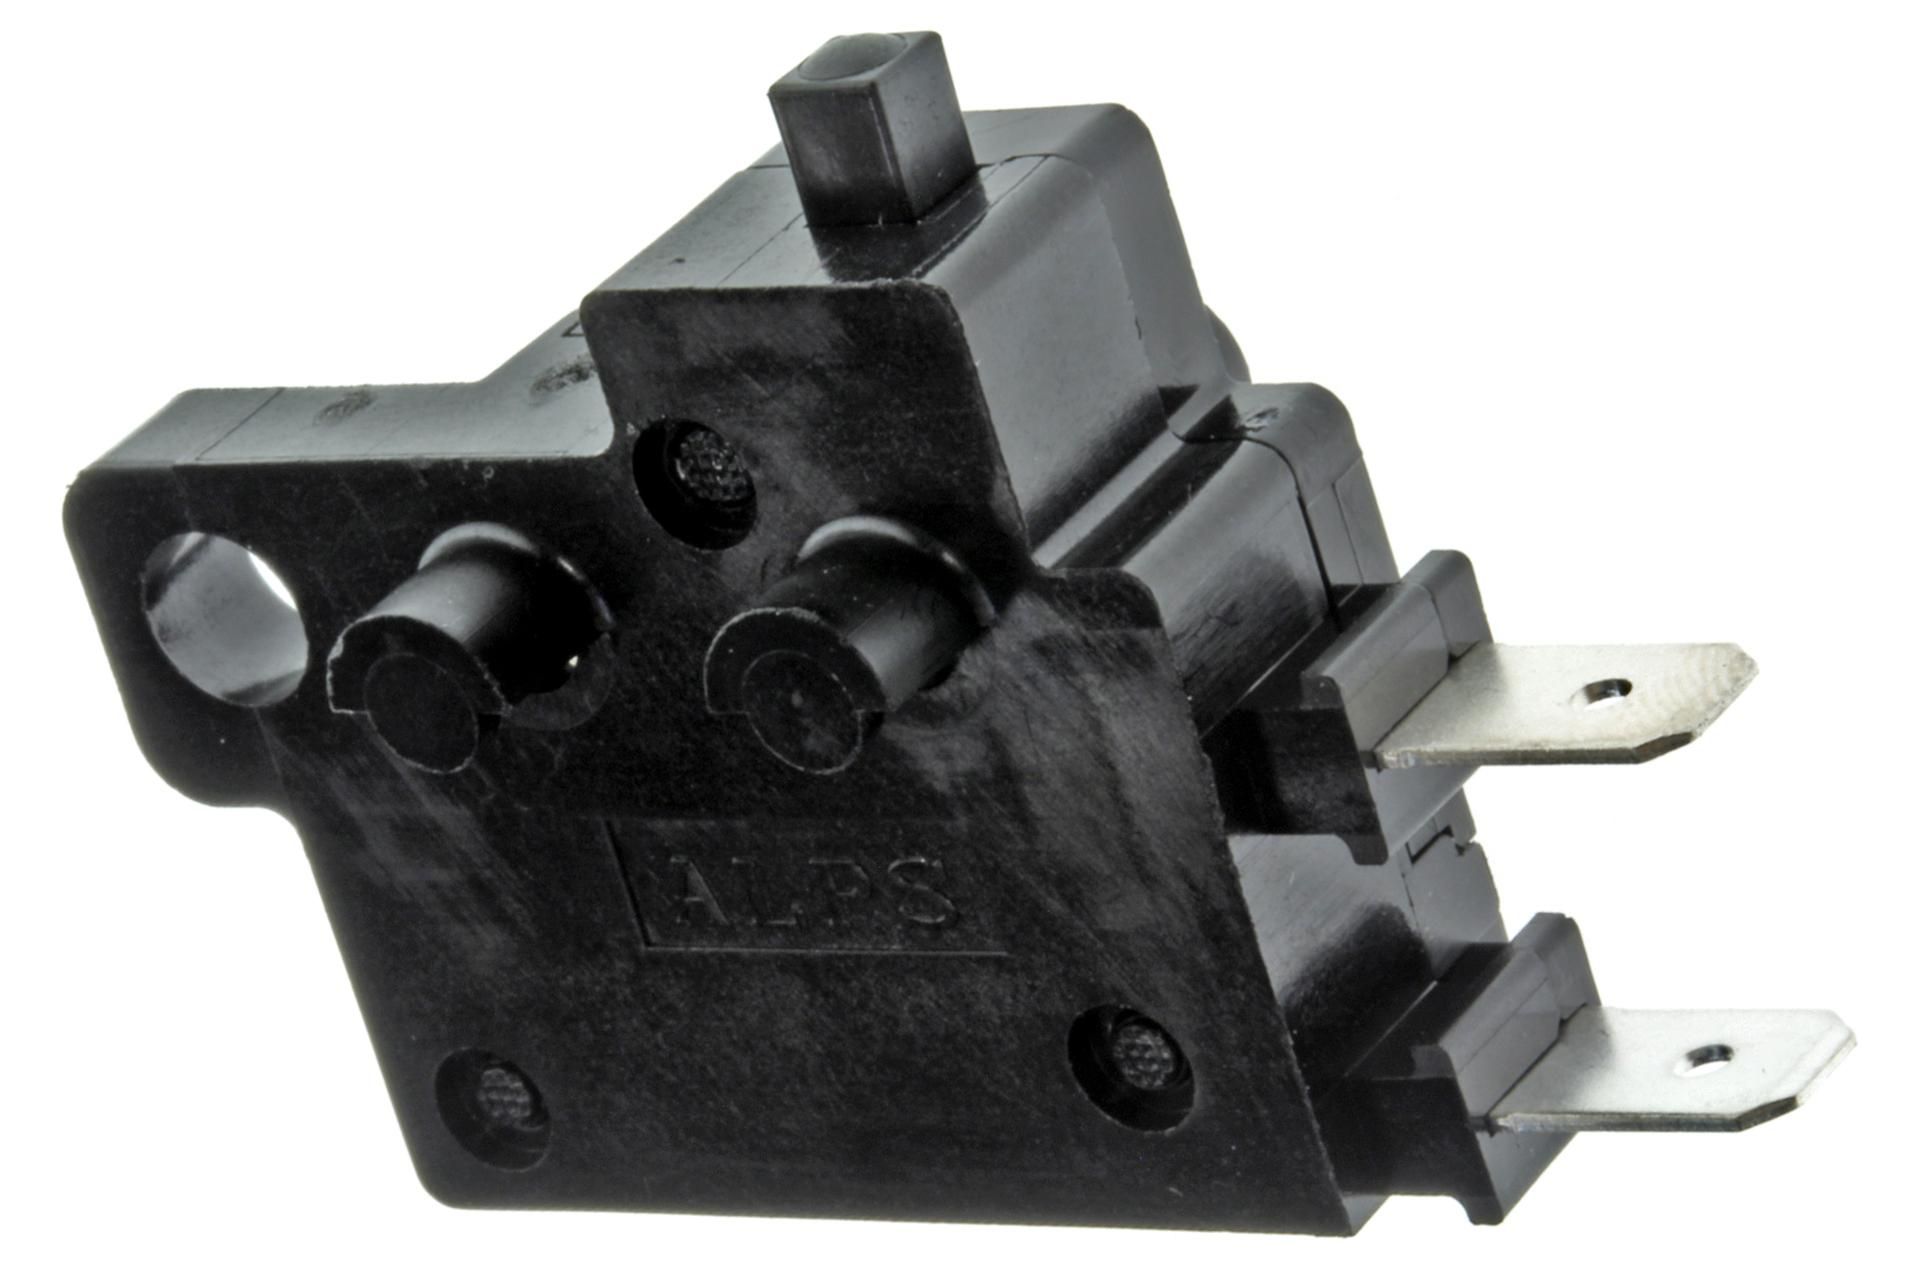 3FV-83980-00-00 Superseded by 4HM-83980-00-00 - FRONT STOP SWITCH AS